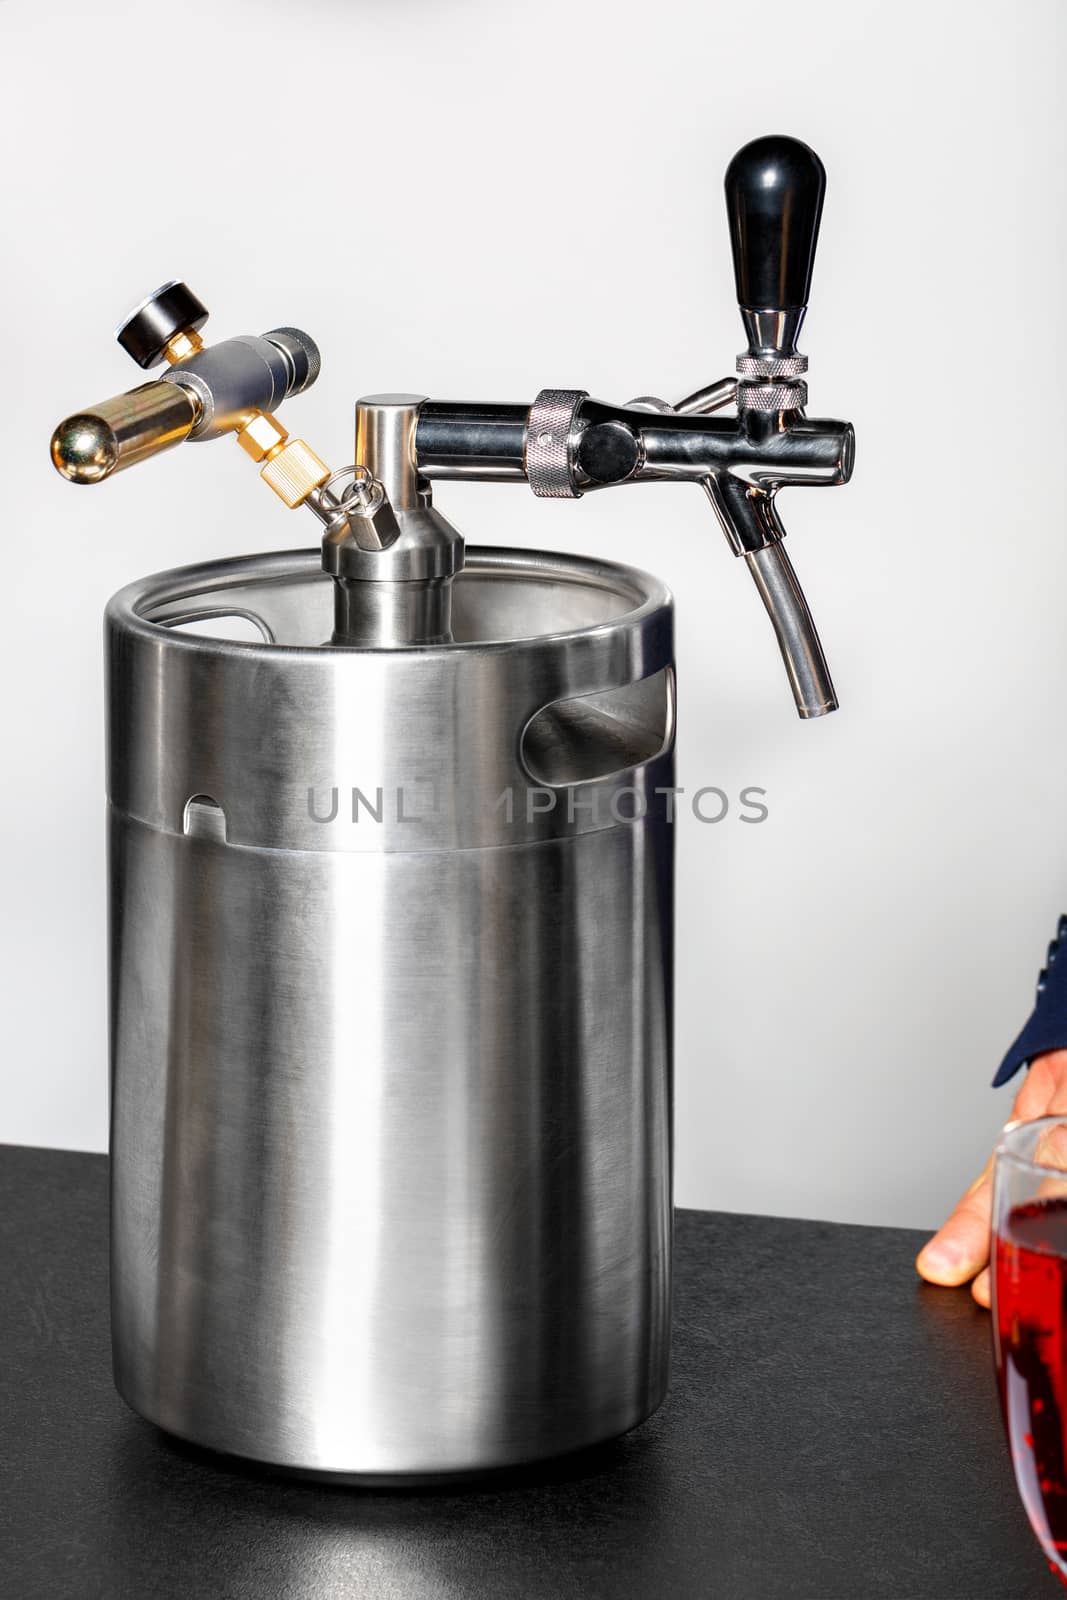 A new clean stainless steel barrel and a tap on it, with a glass of red wine and part of a man's hand visible in the foreground in the corner.